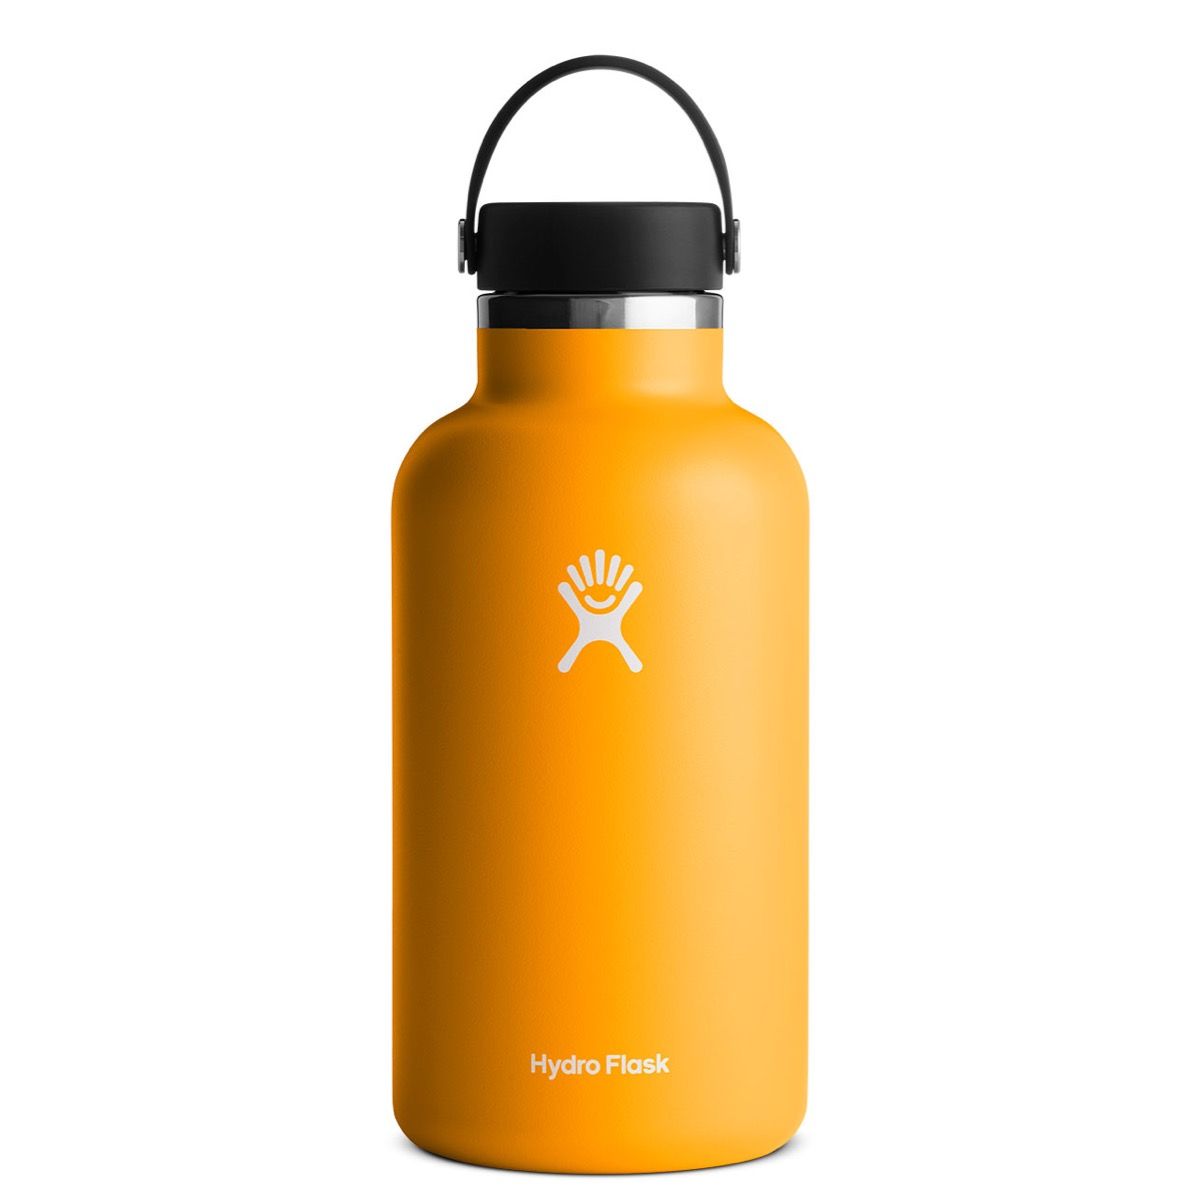 Hydro Flask 64-Ounce Wide Mouth Bottle with Flex Cap